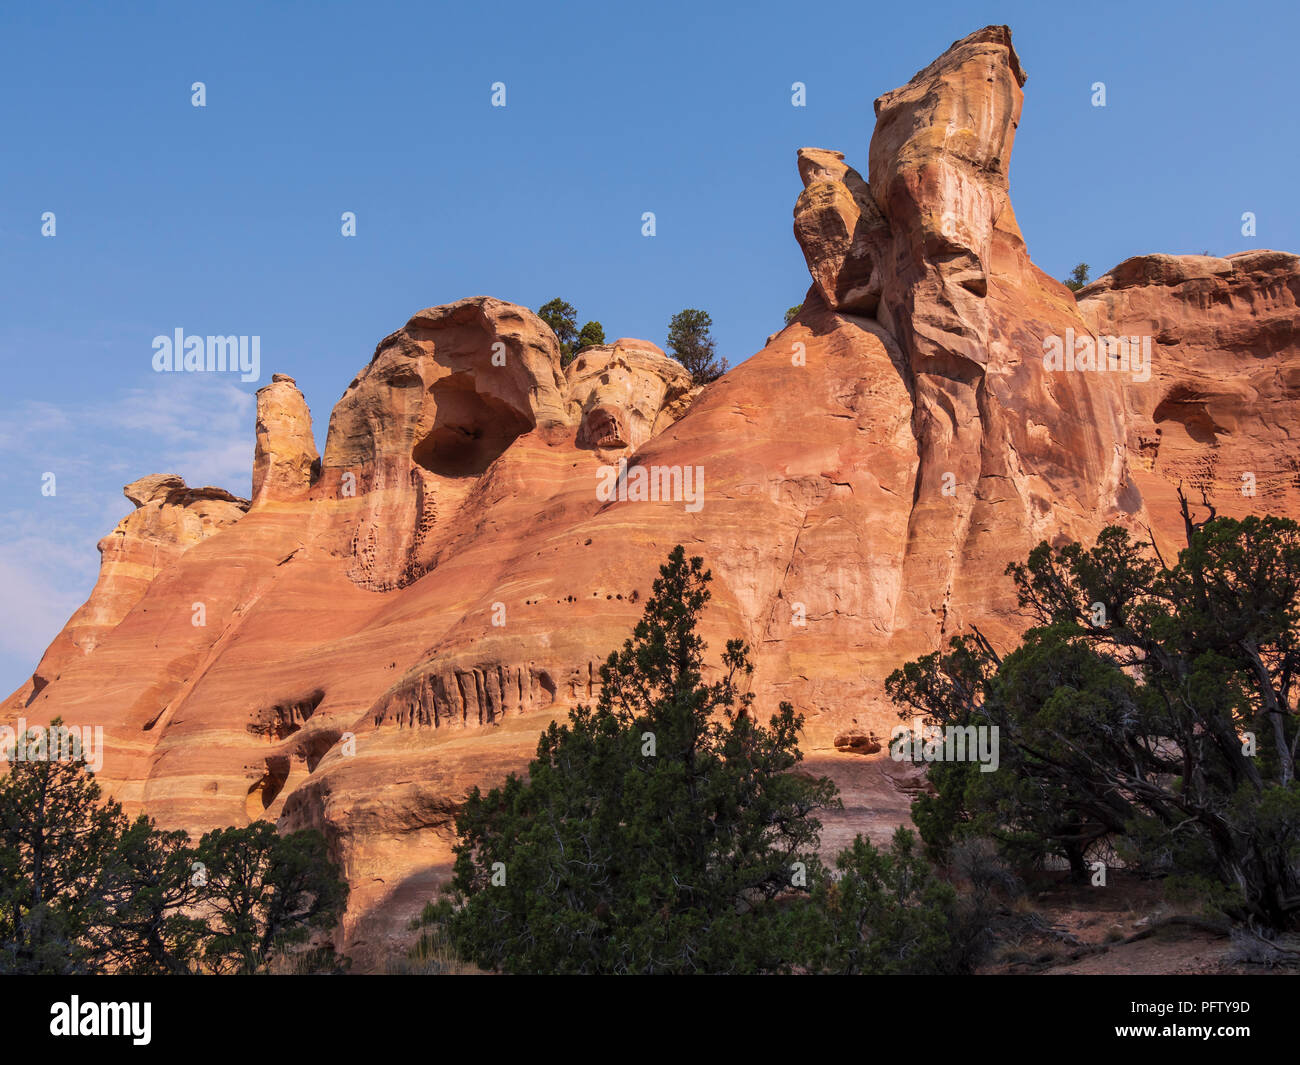 Walls of Rattlesnake Canyon, Black Ridge Wilderness Area, McInnis Canyons National Conservation Area, Grand Junction, Colorado. Stock Photo